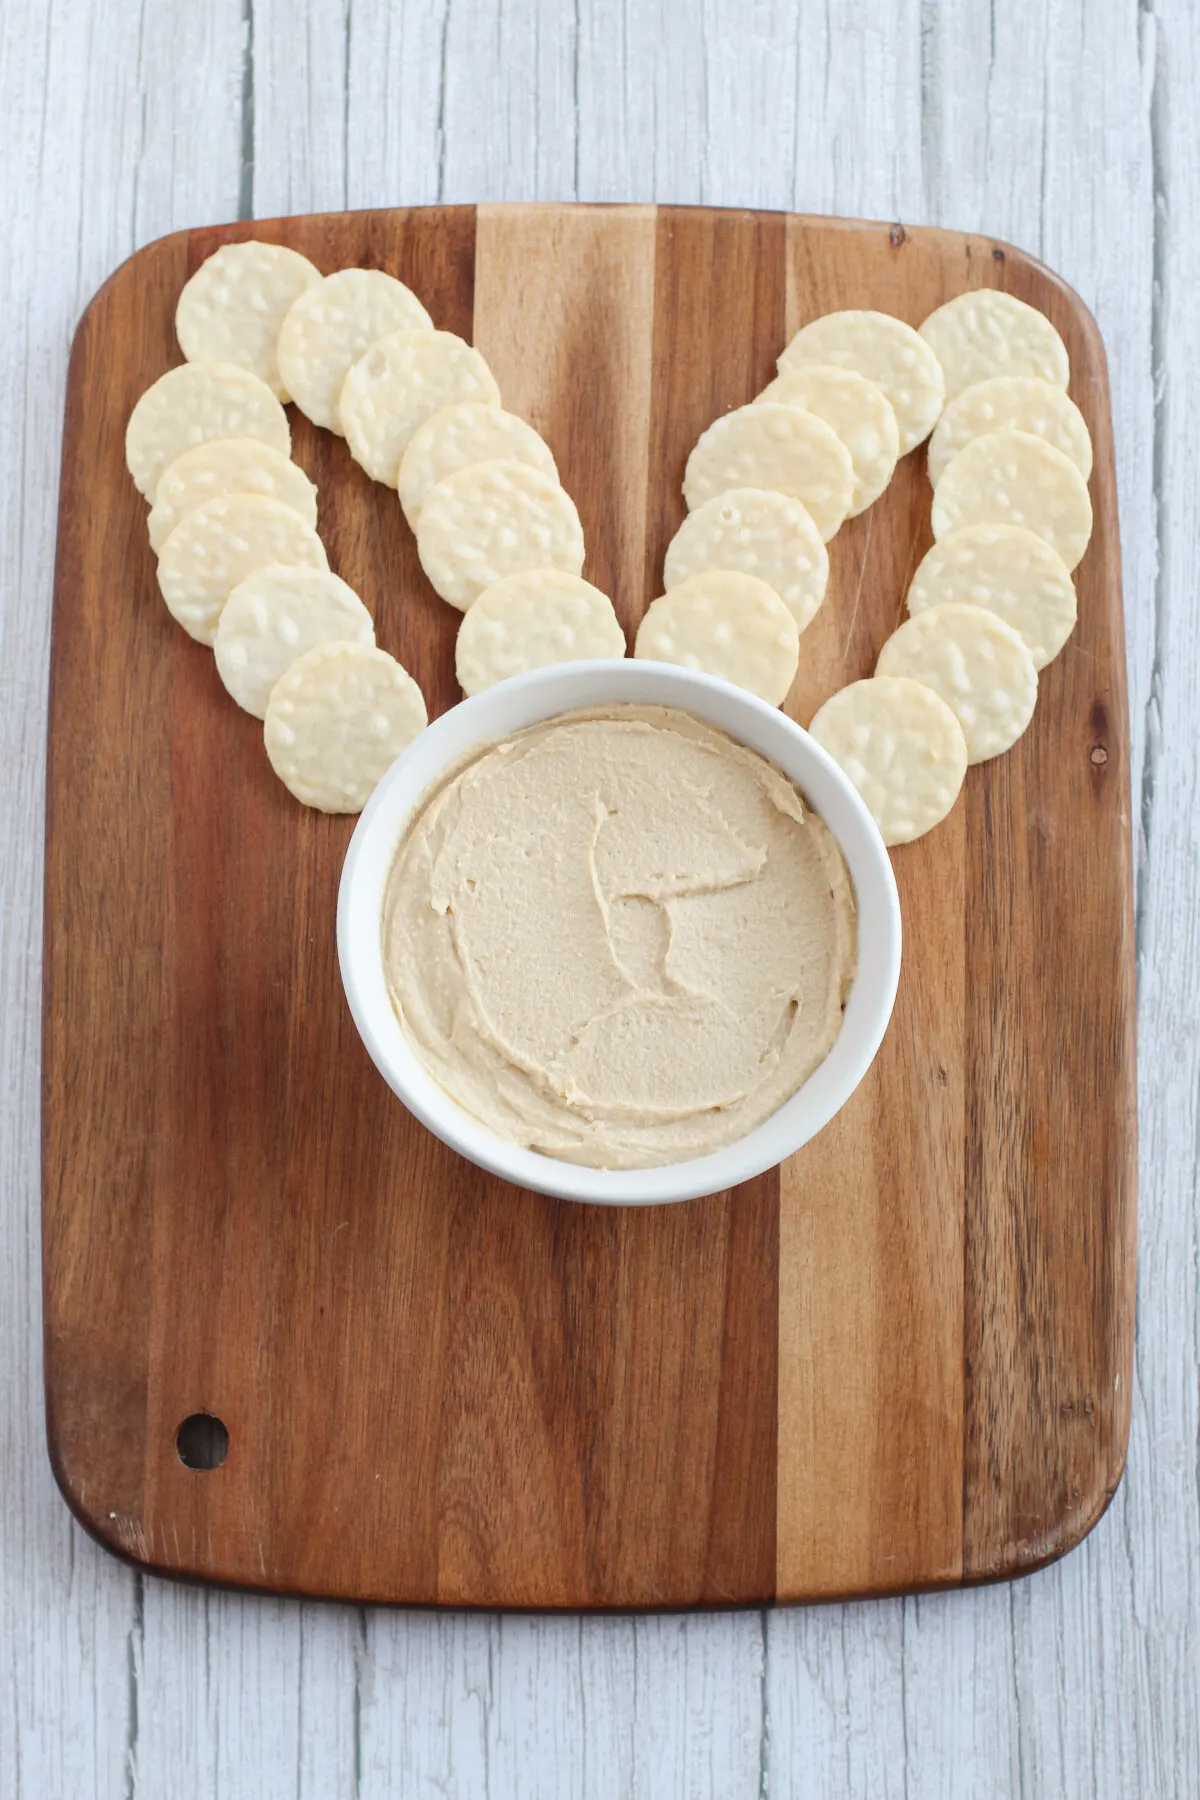 Hummus placed in a dish under the "ears".